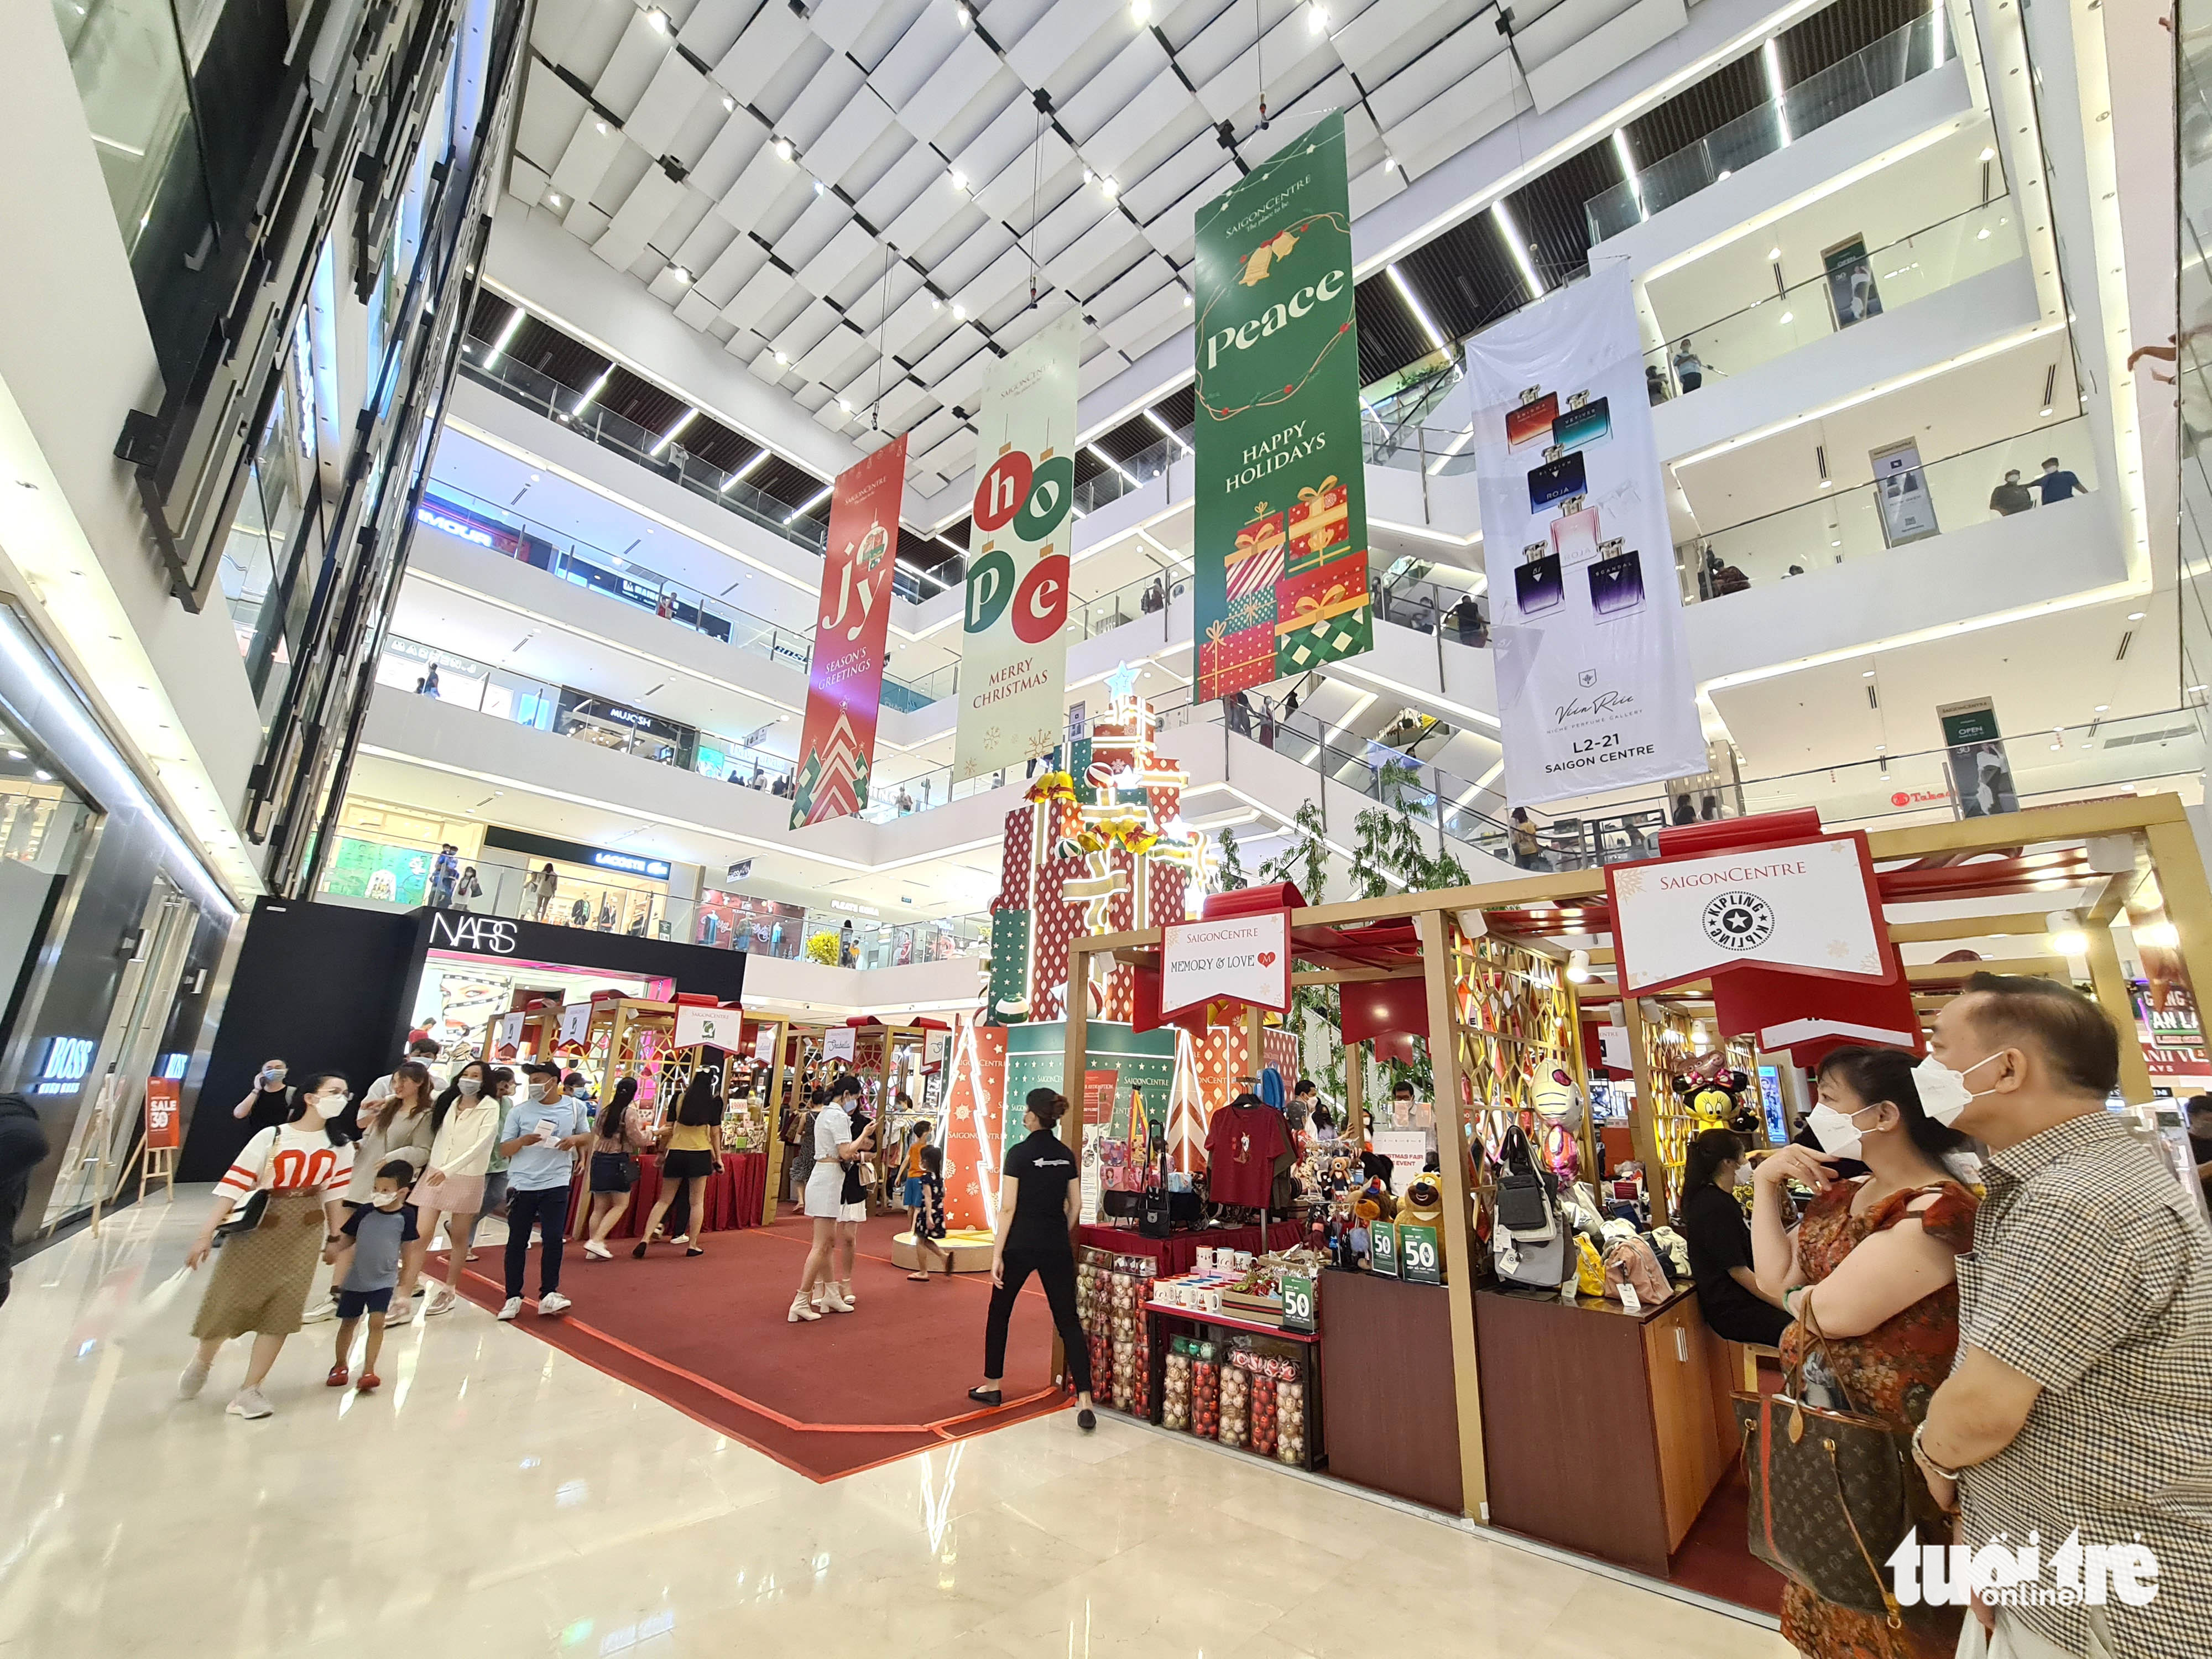 People visit a shopping mall in Ho Chi Minh City. Photo: Ngoc Hien / Tuoi Tre